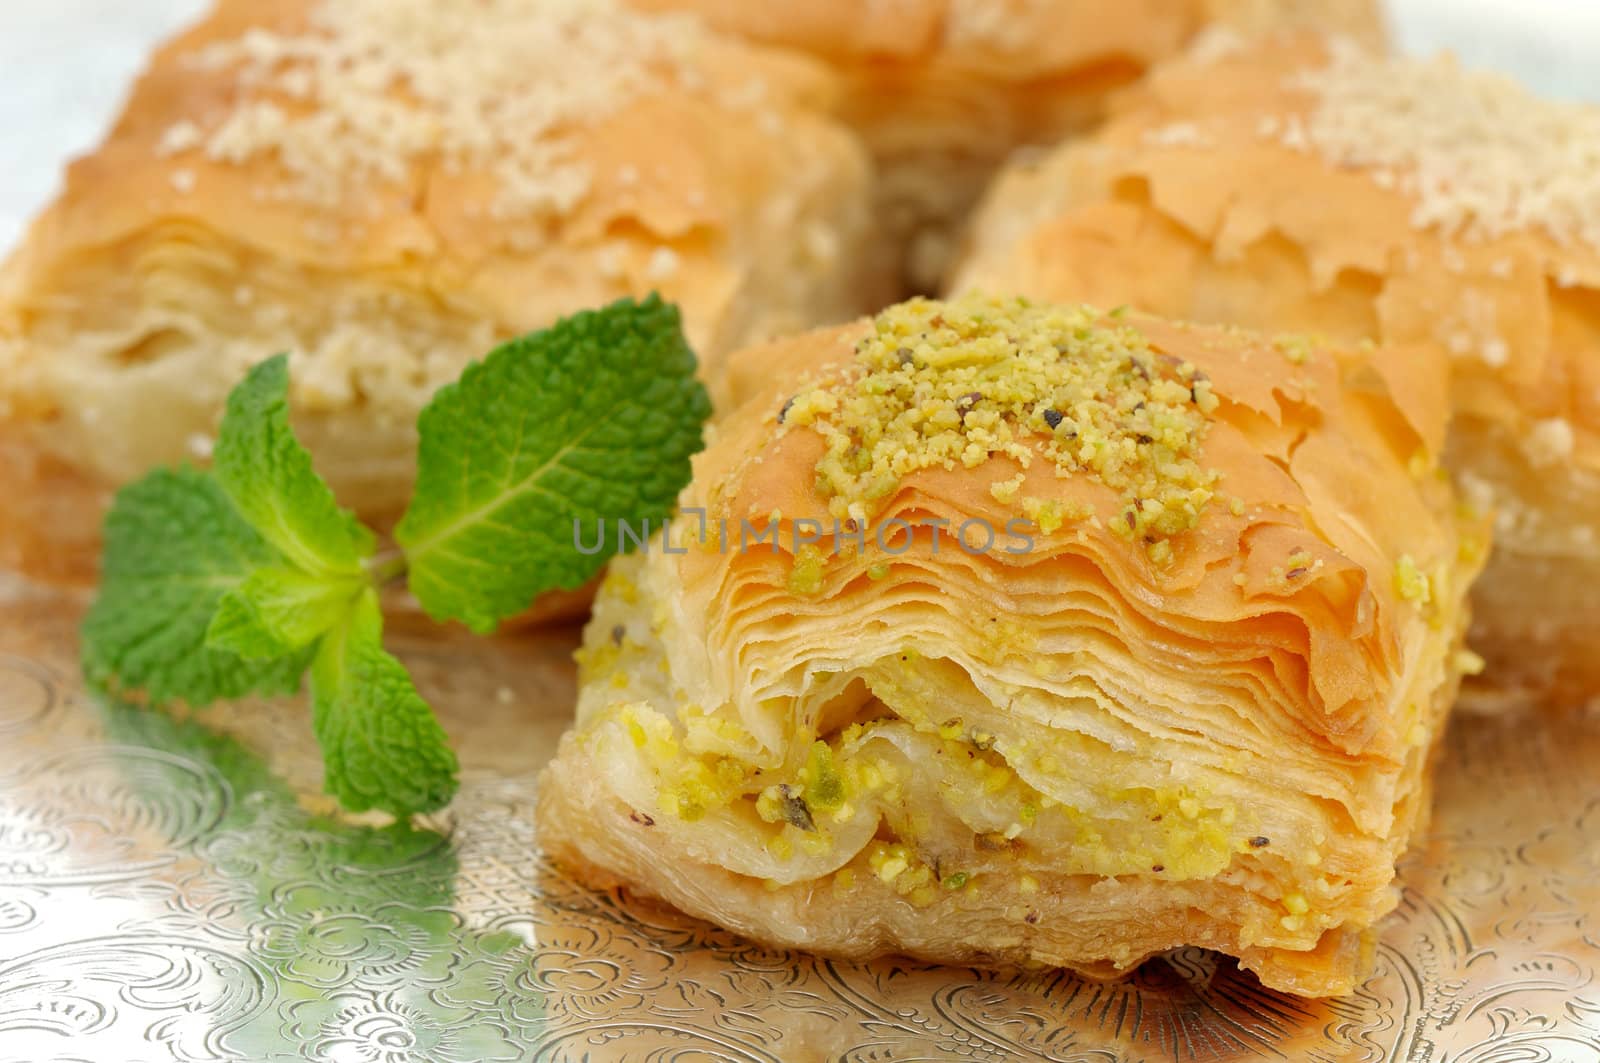 Fresh baklava served on a typical Moroccan tray